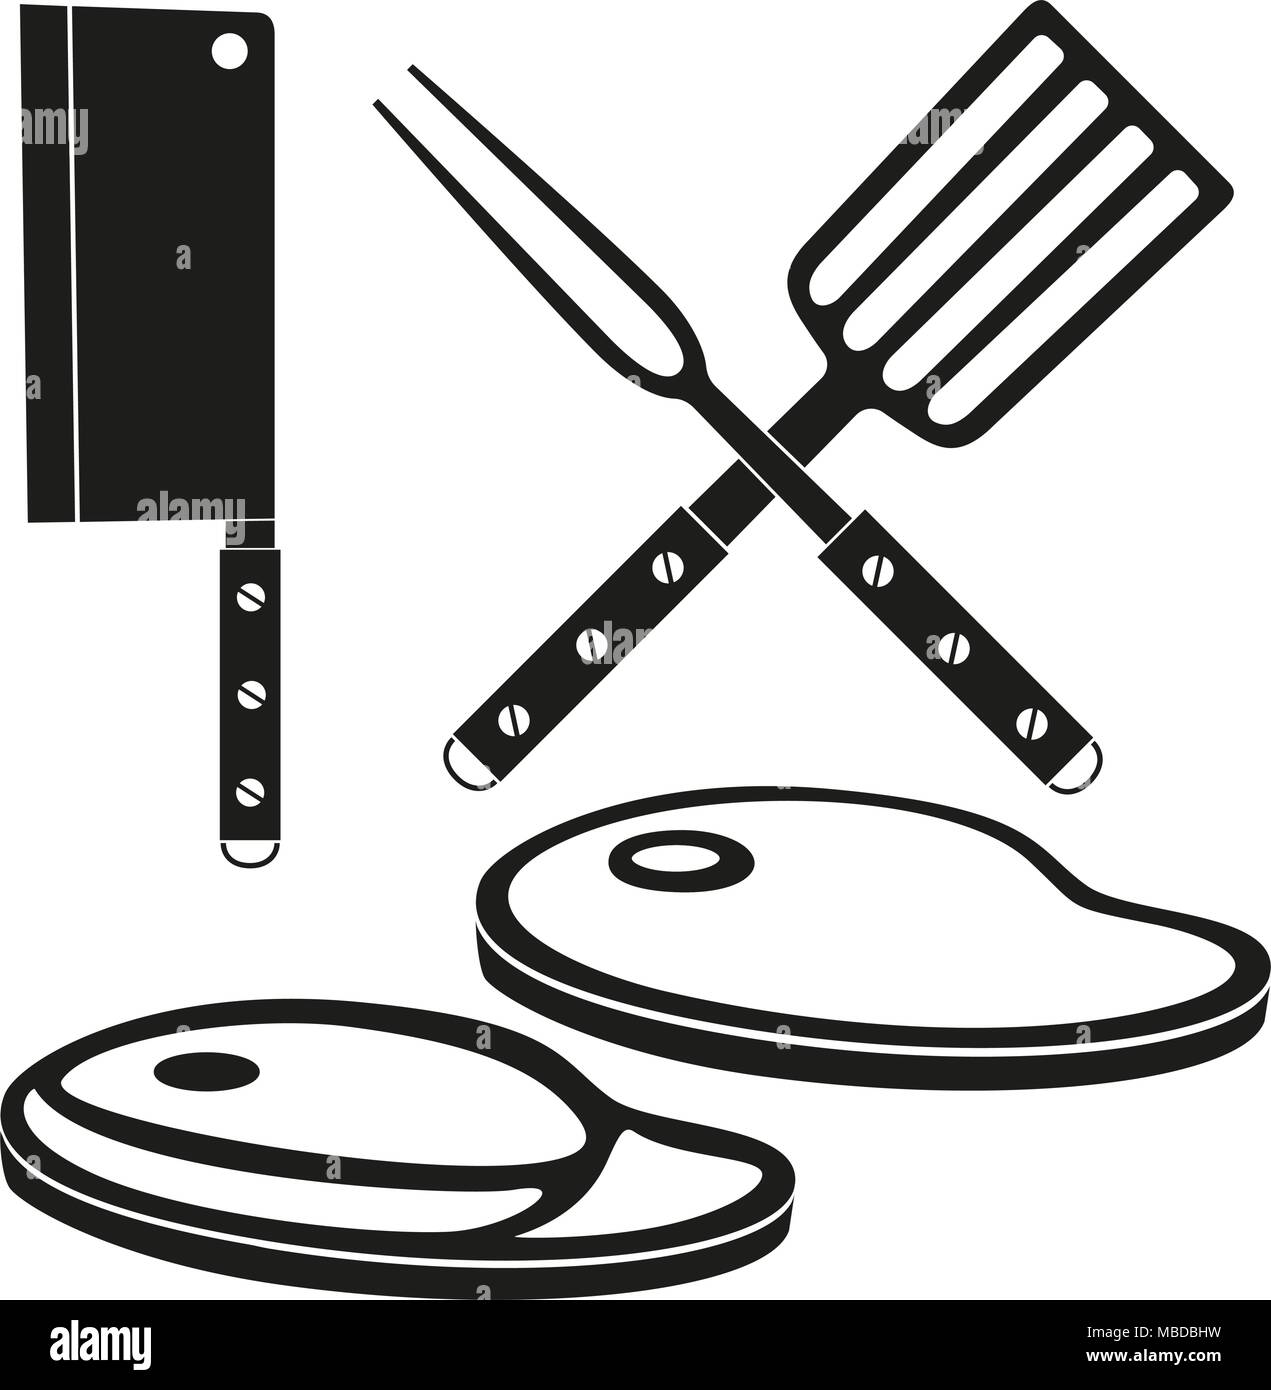 Black and white steak cooking silhouette set. Food themed vector illustration for gift card certificate sticker, badge, sign, stamp, logo, label, icon Stock Vector